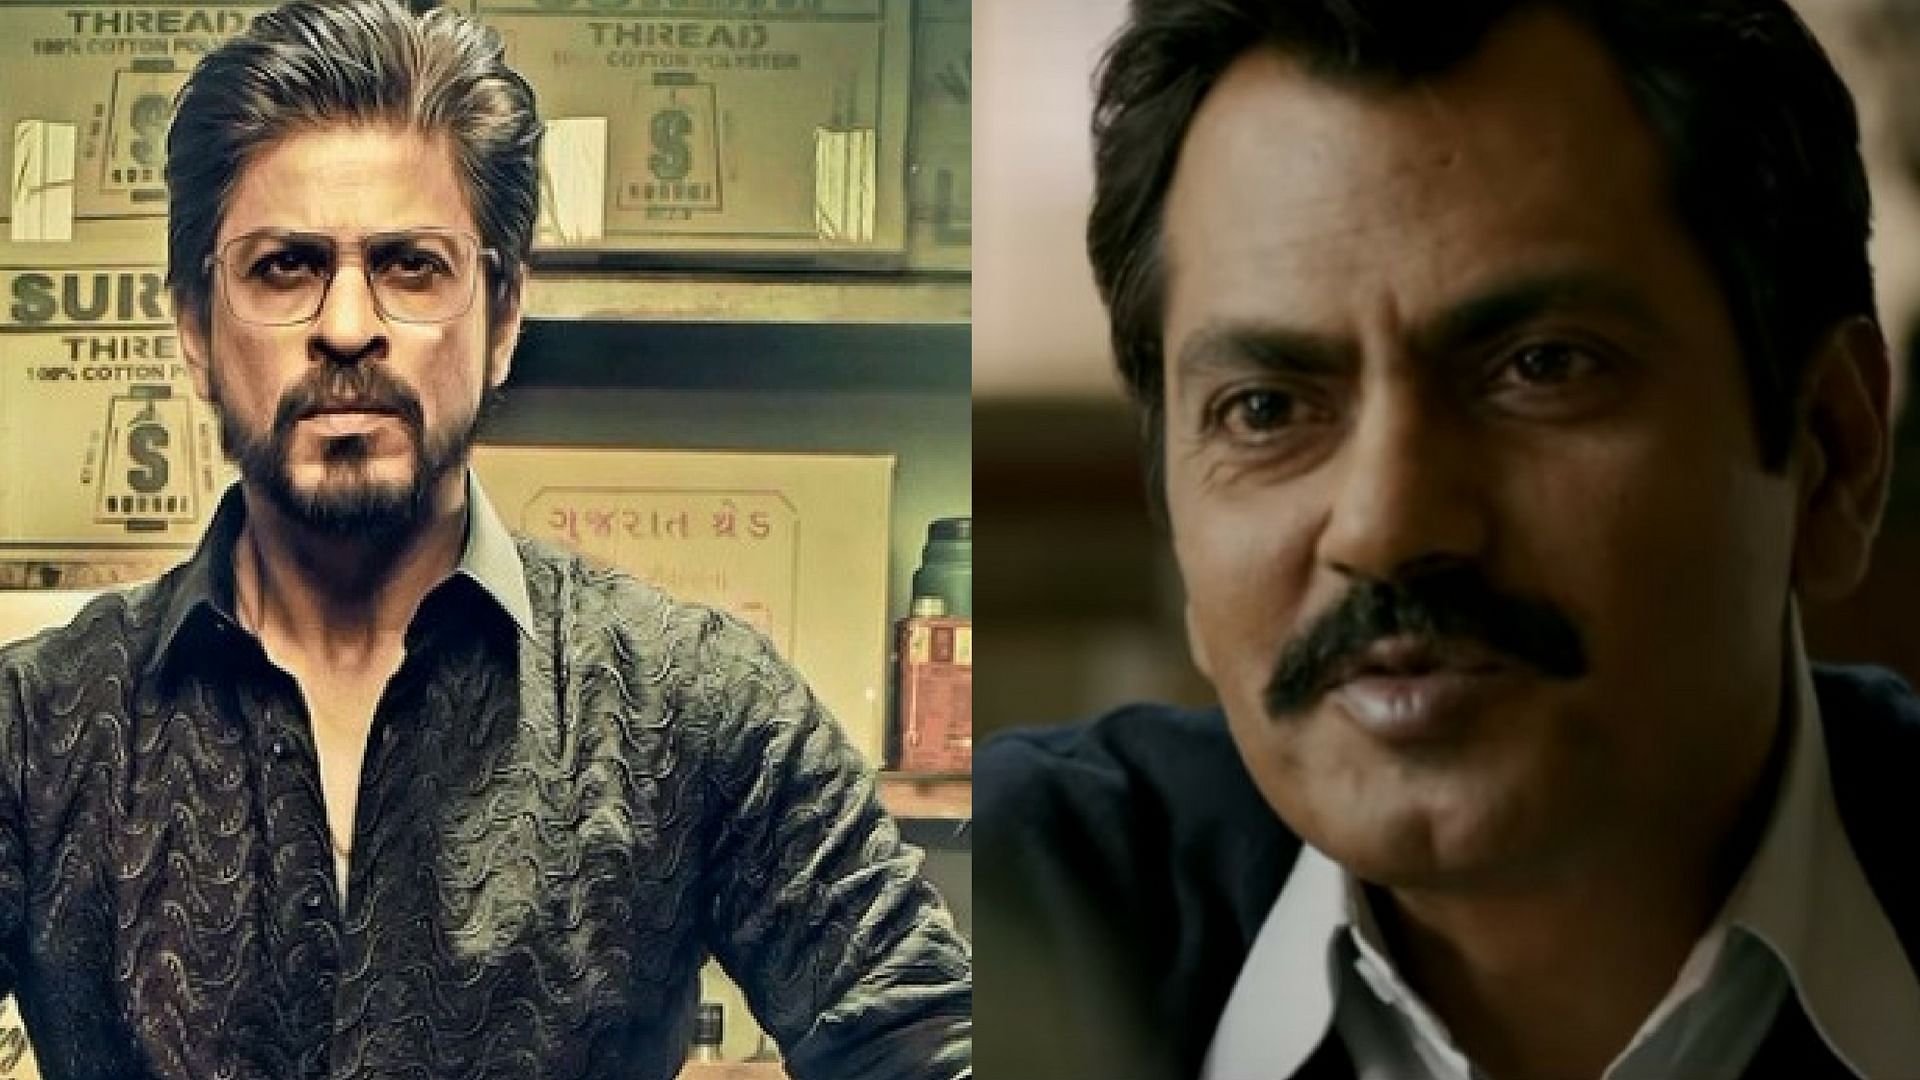 Shah Rukh Khan and Nawazuddin Siddiqui would star together for the first time in <i>Raees</i>.&nbsp;